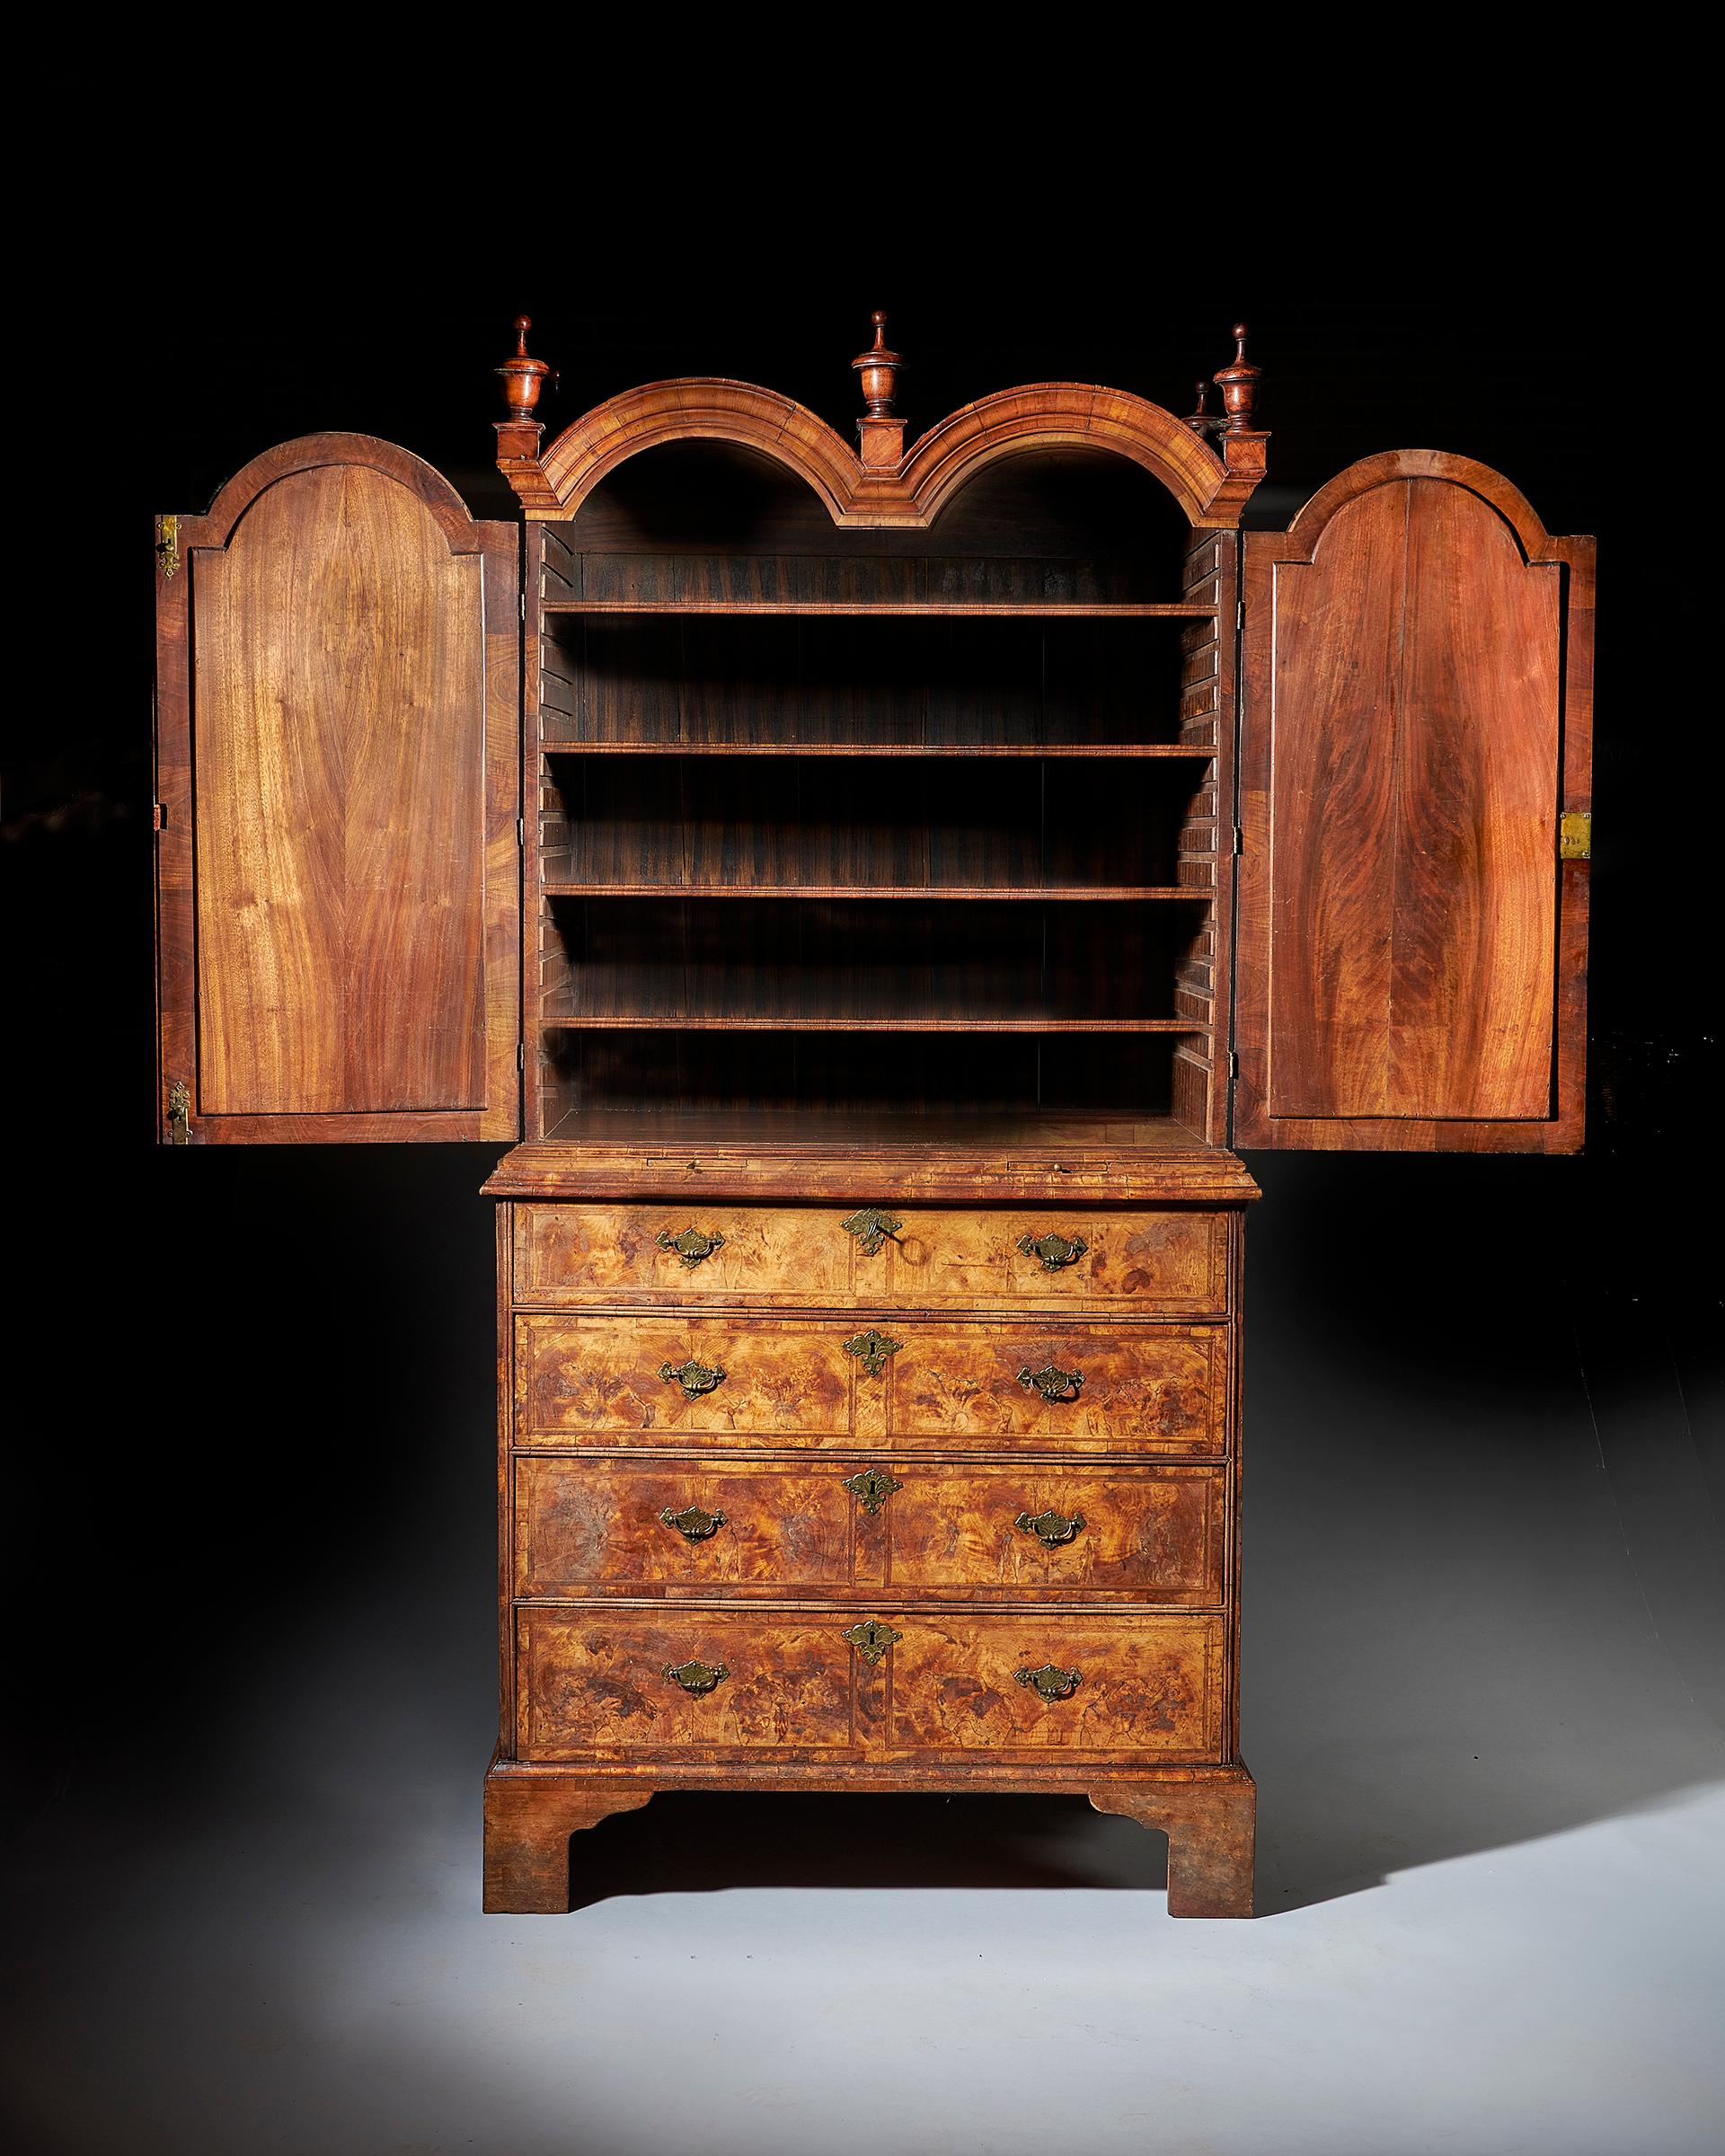 An exceptional and original highly figured George I walnut double dome bookcase on chest, circa 1720-1730.

To the bookcase, original surmounted walnut finials on moulded chimneys sit above well-shaped moulded double dome arches to the front and